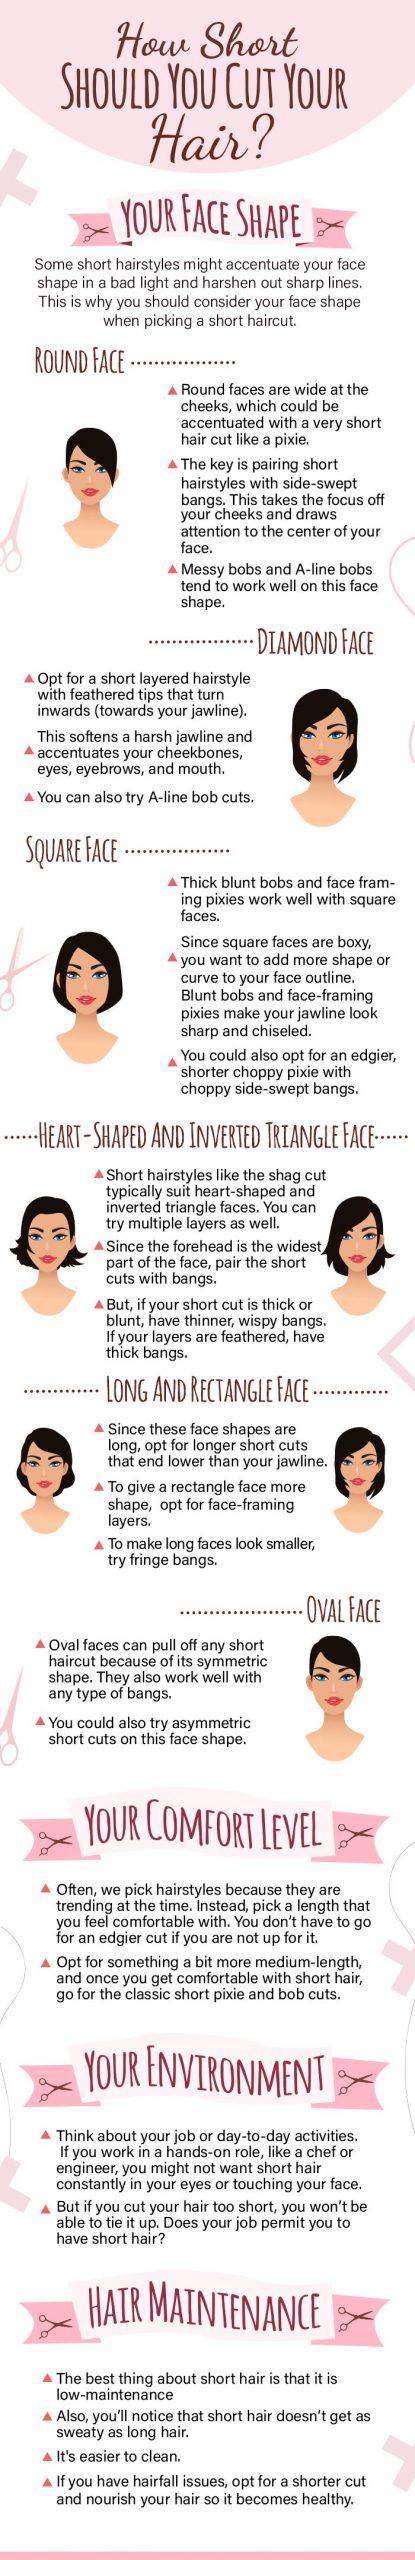 how short should you cut your hair [infographic]